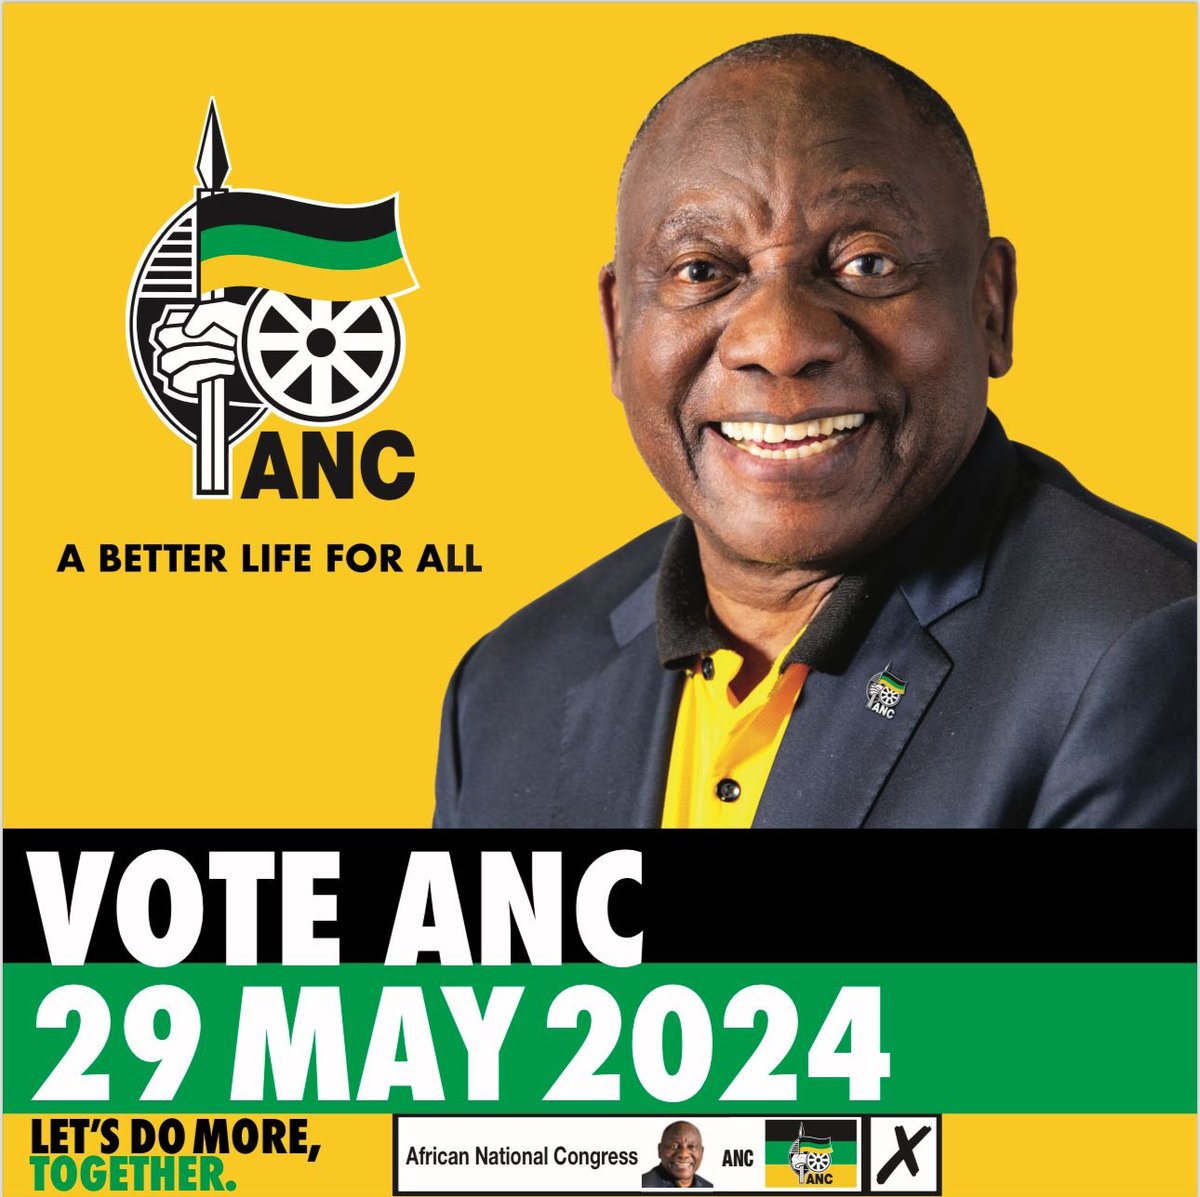 Your vote is the key to enabling a better South Africa. Each ballot influences our nation's destiny. Make your voice heard; make your mark count. Join us as we defend the gains of our democracy! Let’s Do More Together, Vote ANC! #VoteANC2024 #LetsDoMoreTogether #IAmVotingANC